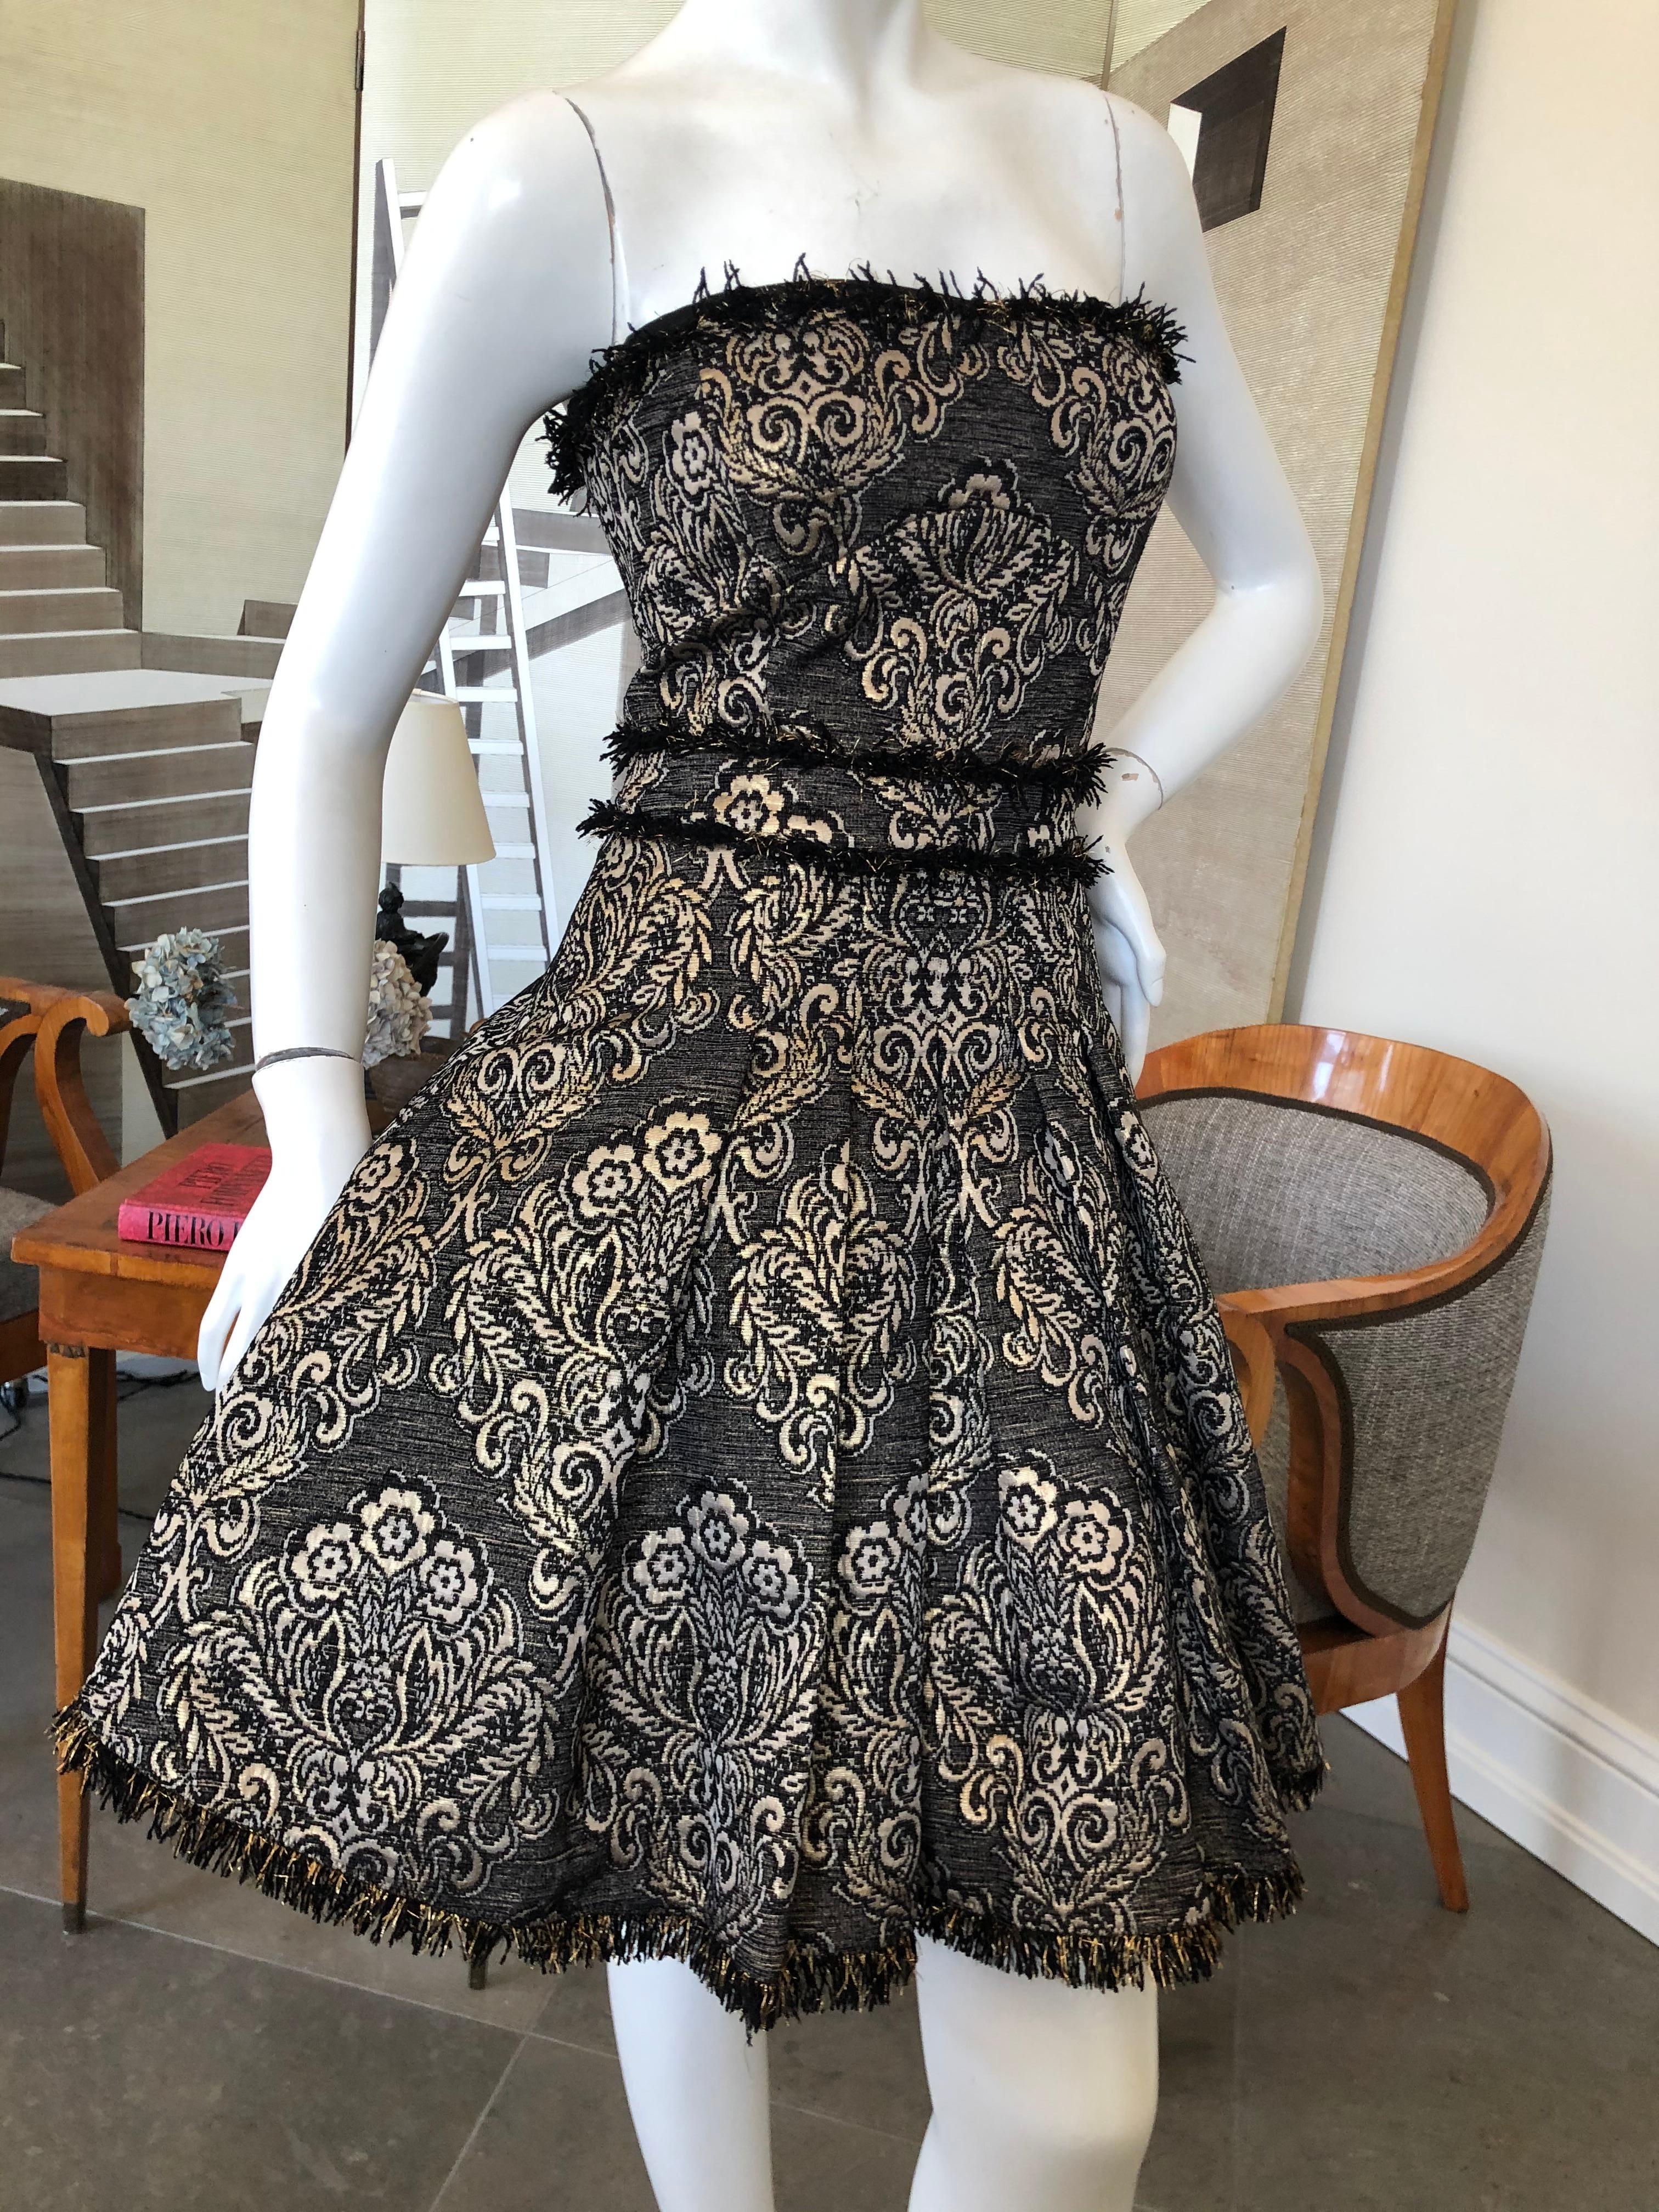  D&G Strapless Mini Ball Gown with Full Corset & Petticoats by Dolce & Gabbana In Excellent Condition For Sale In Cloverdale, CA